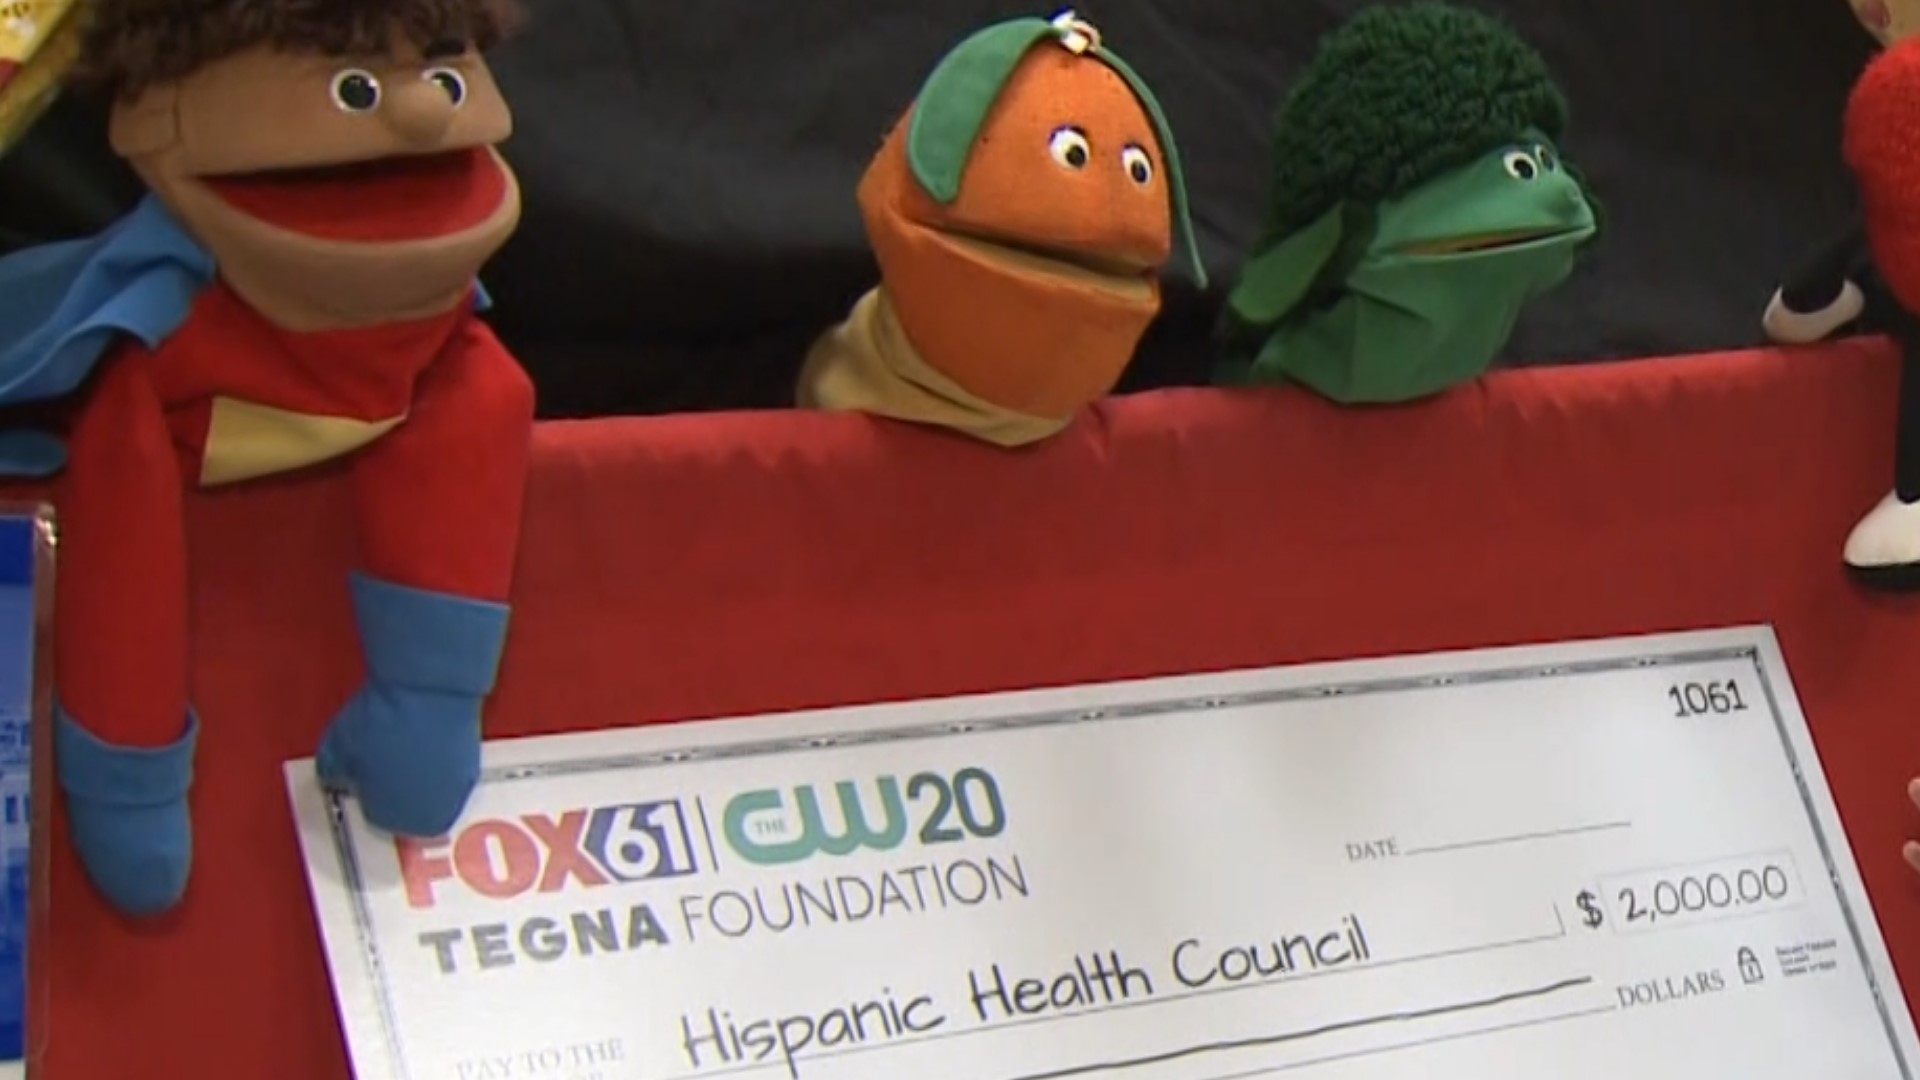 Hispanic Health Council is making an impact in the Hartford community with a kids' nutrition puppet show and a Wellness Center partnership with Goodwin University.